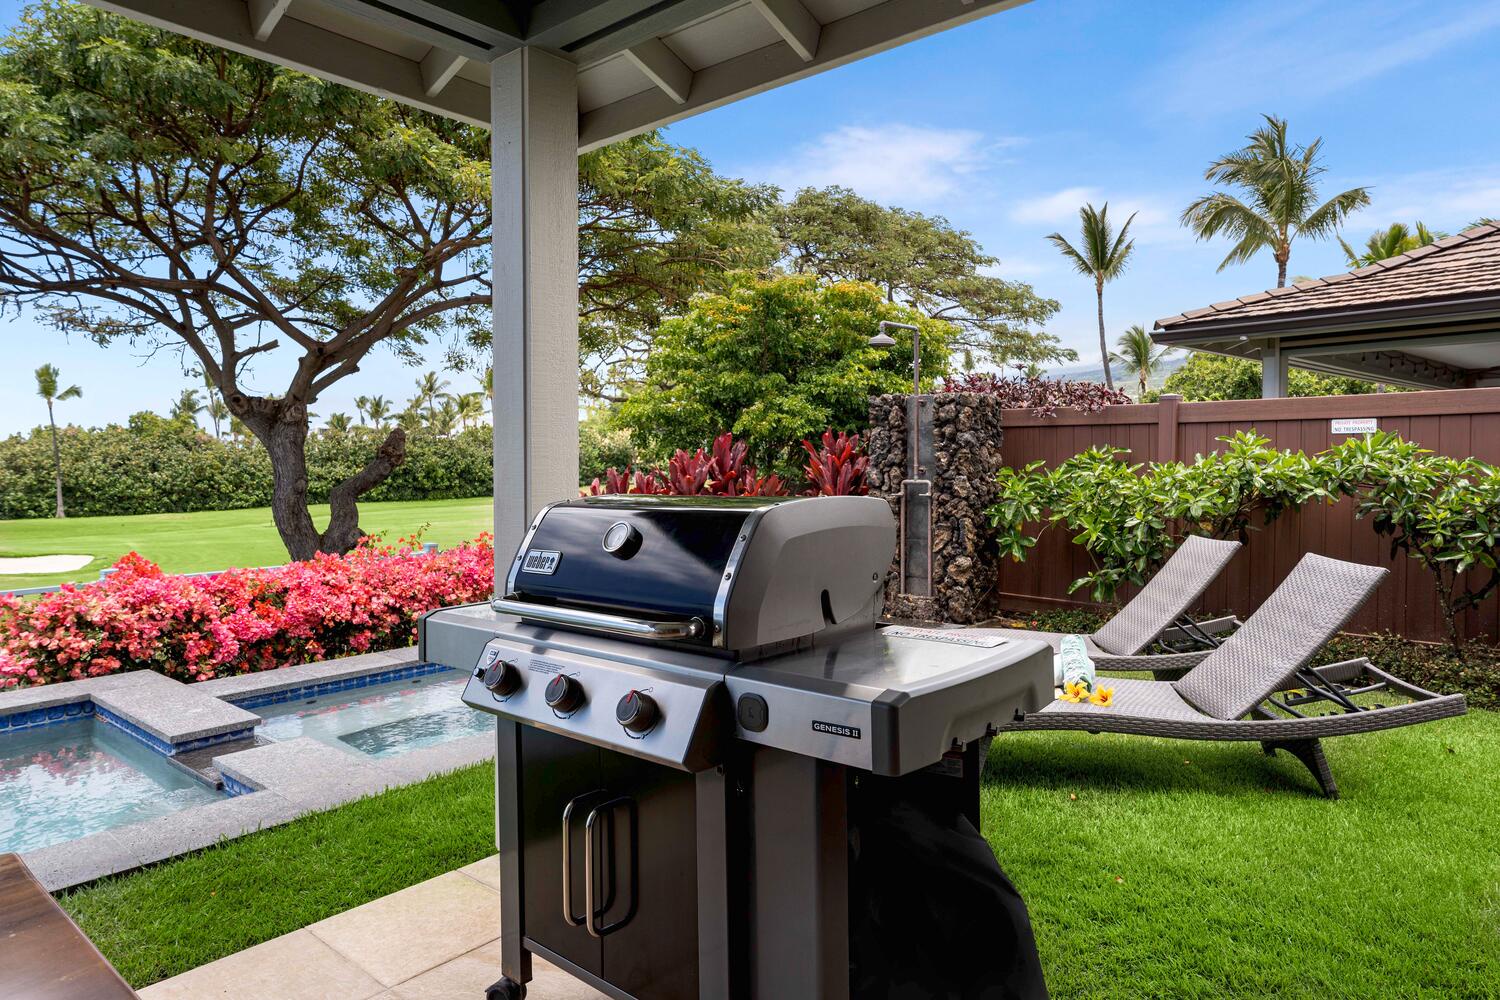 Kailua-Kona Vacation Rentals, Holua Kai #26 - Outdoor grilling station ready for a summer barbecue.